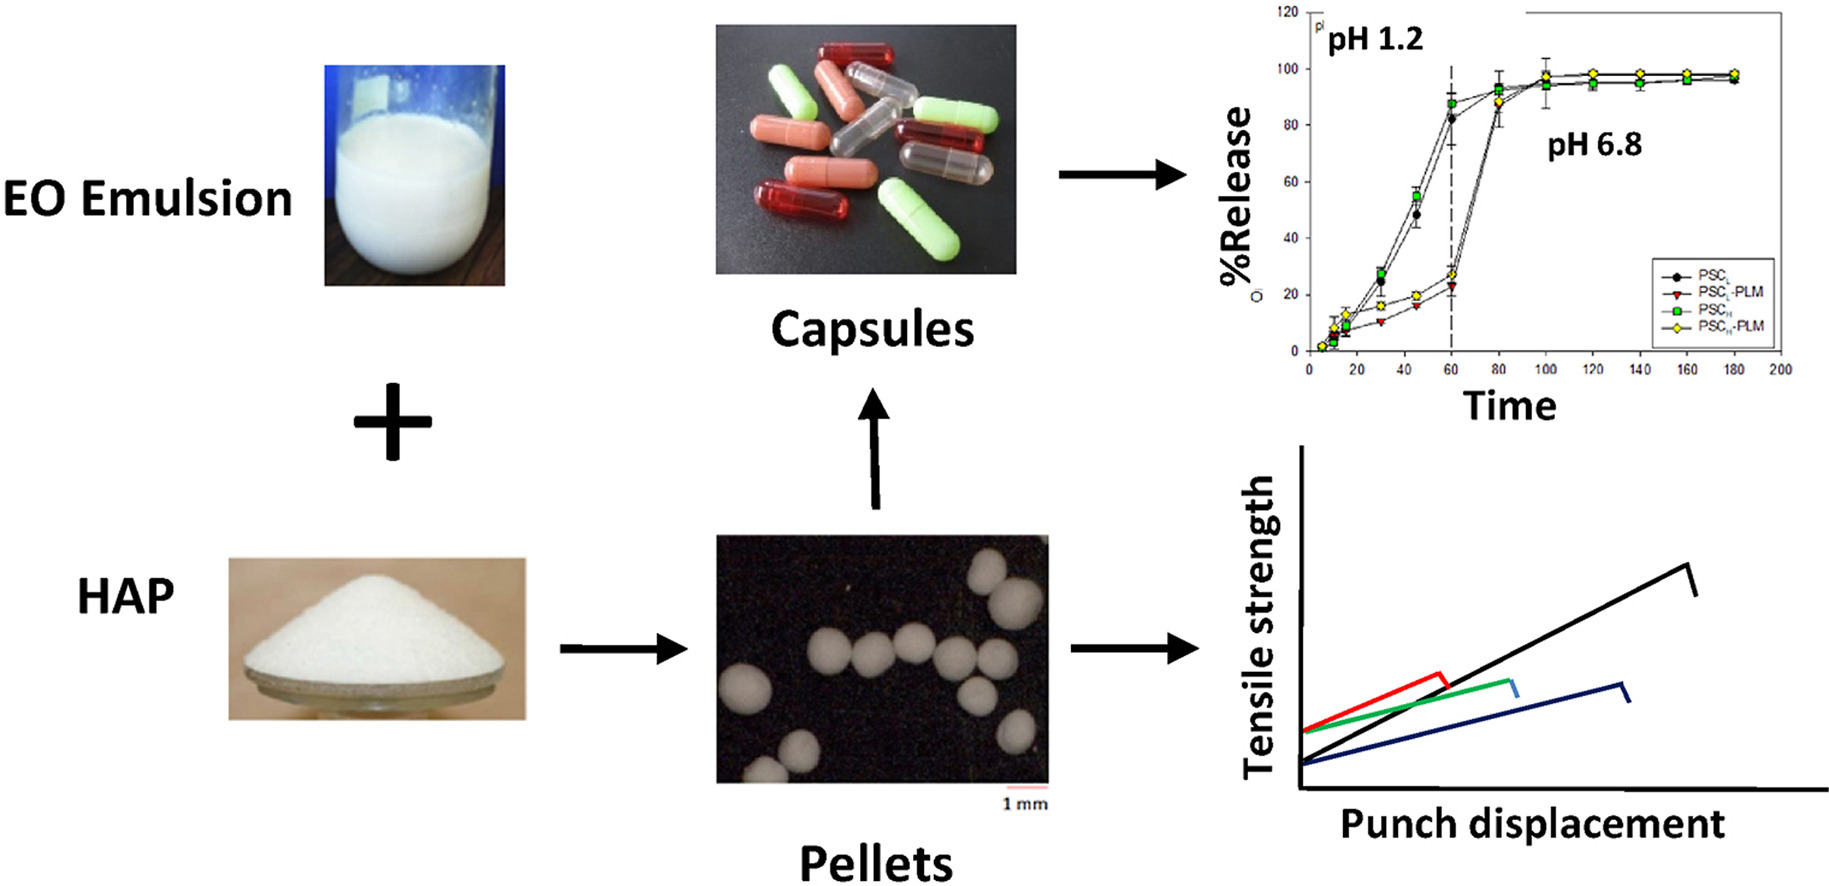 Preparation, characterization, and in vitro release of microencapsulated essential oil hydroxyapatite pellets filled into multifunctional capsules